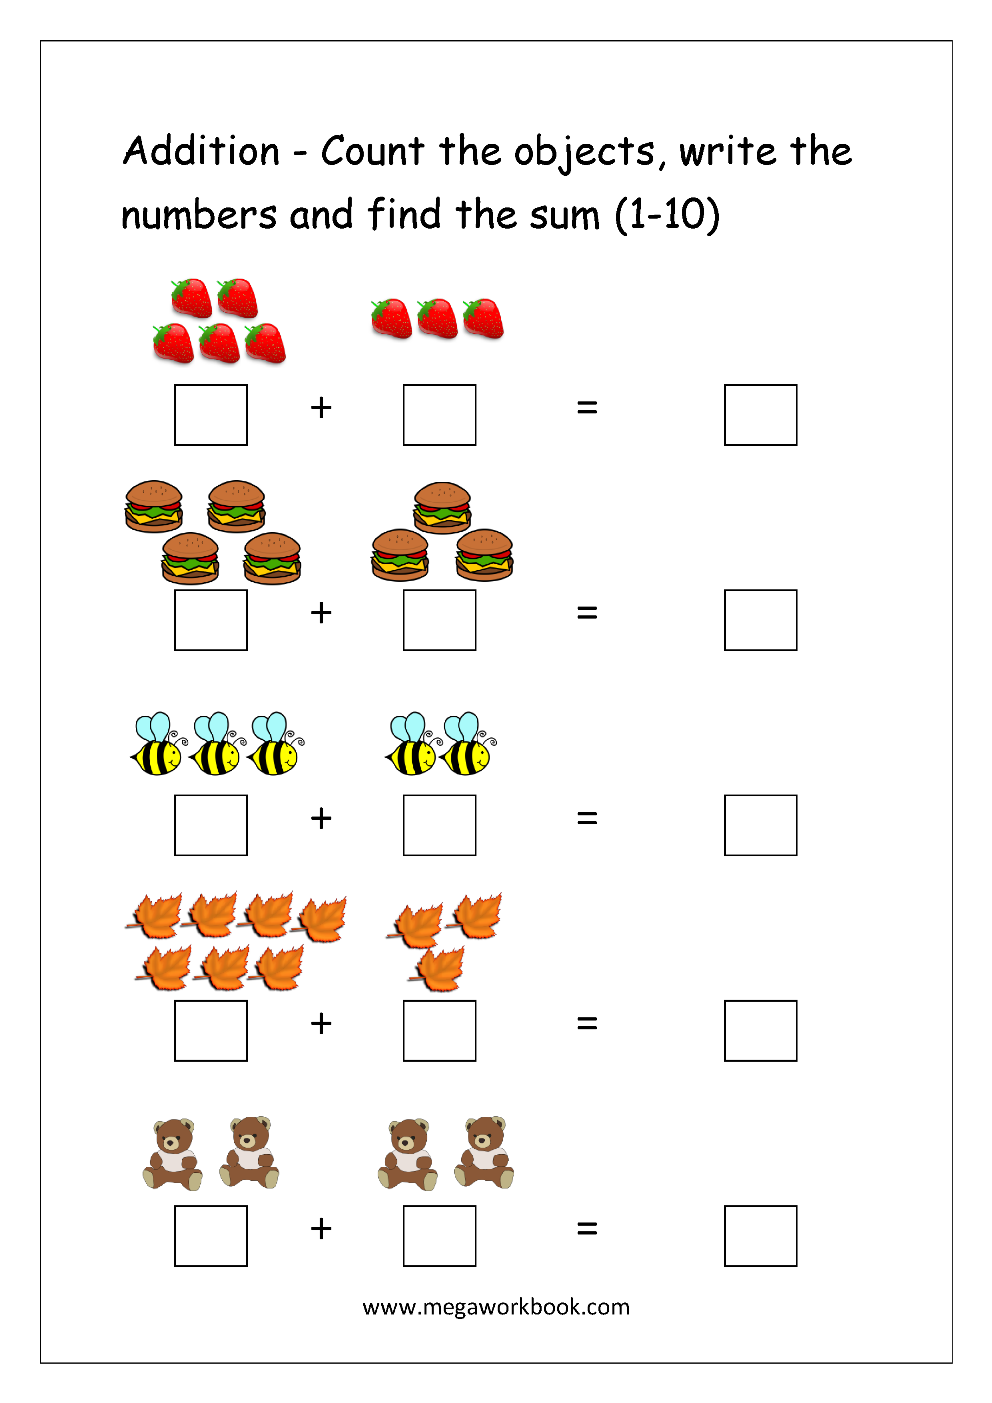 Adding Numbers With Pictures Worksheets